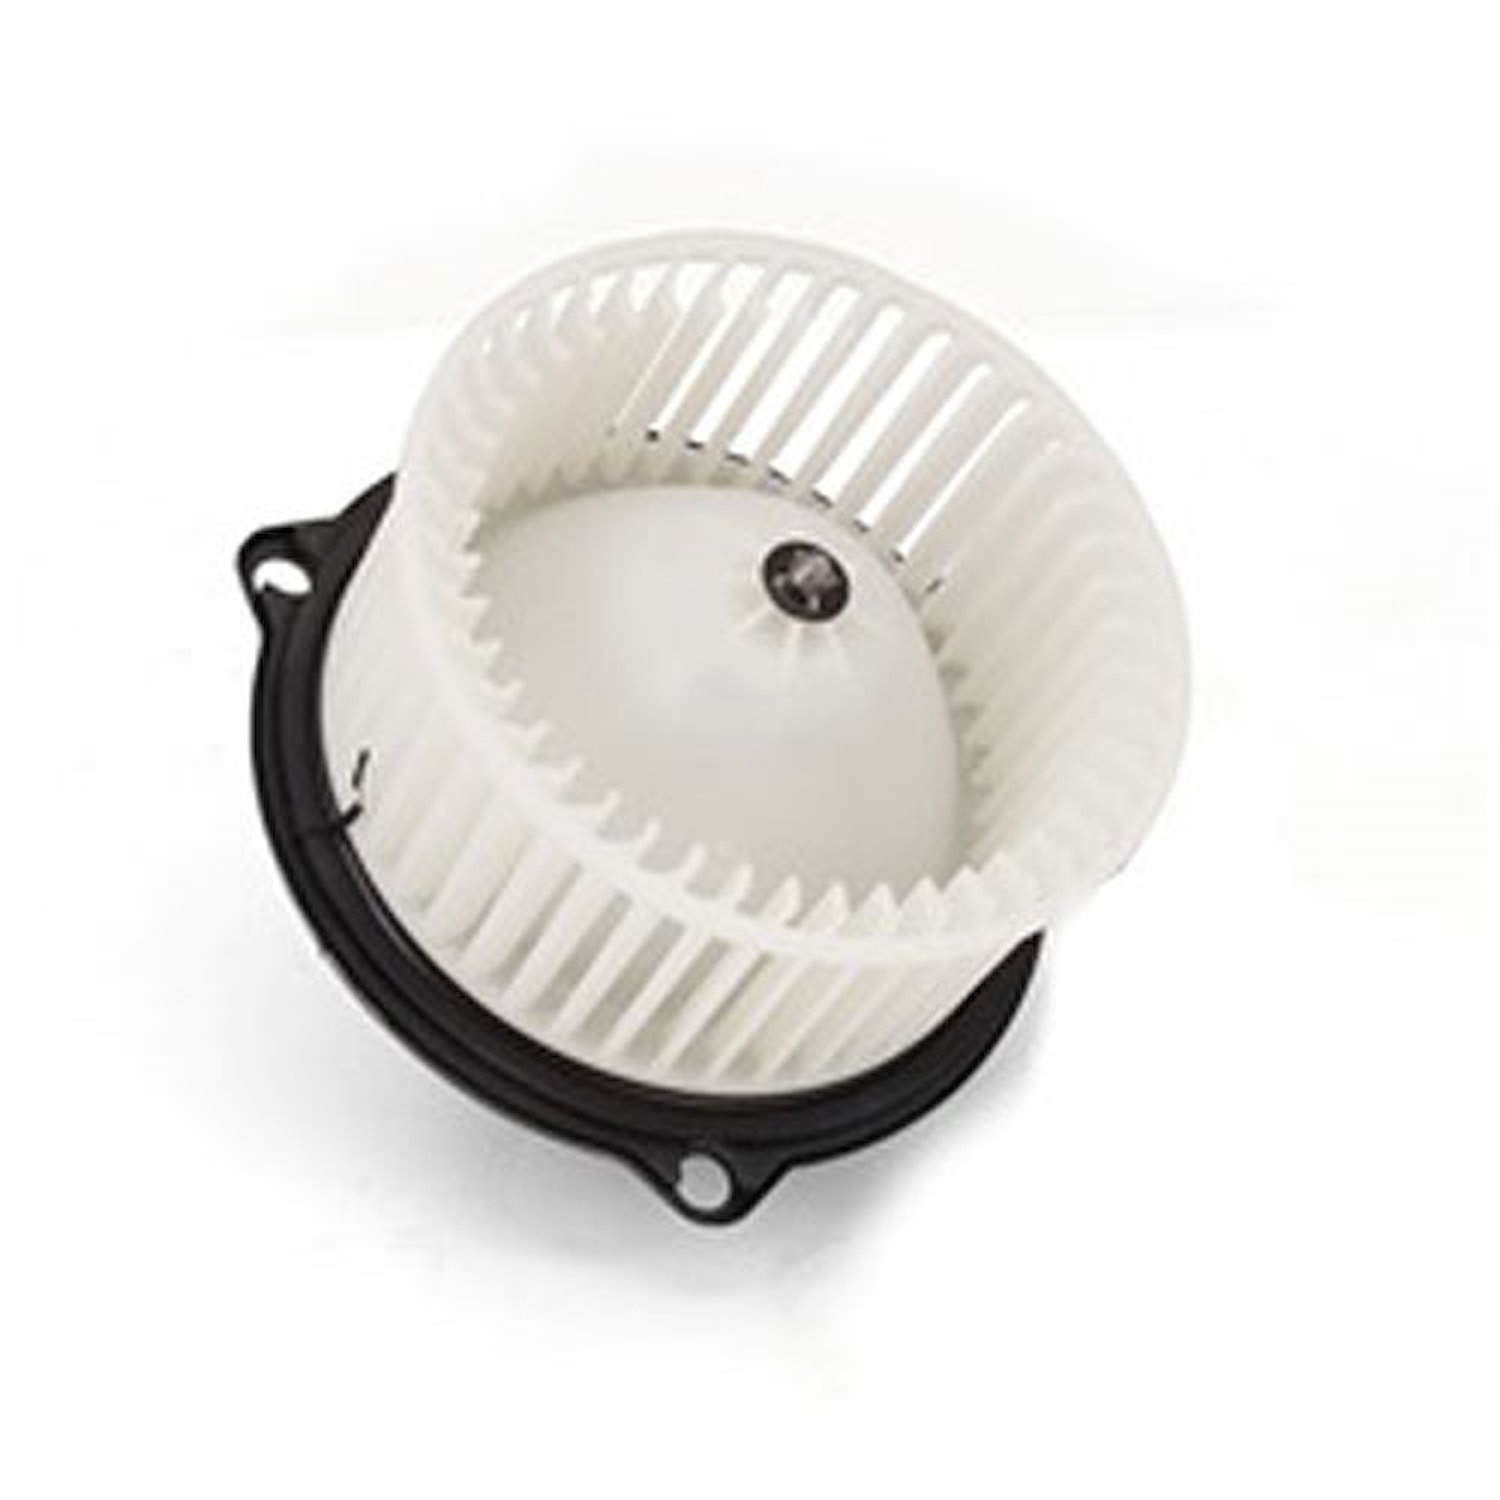 This blower assembly from Omix-ADA fits 97-01 Jeep